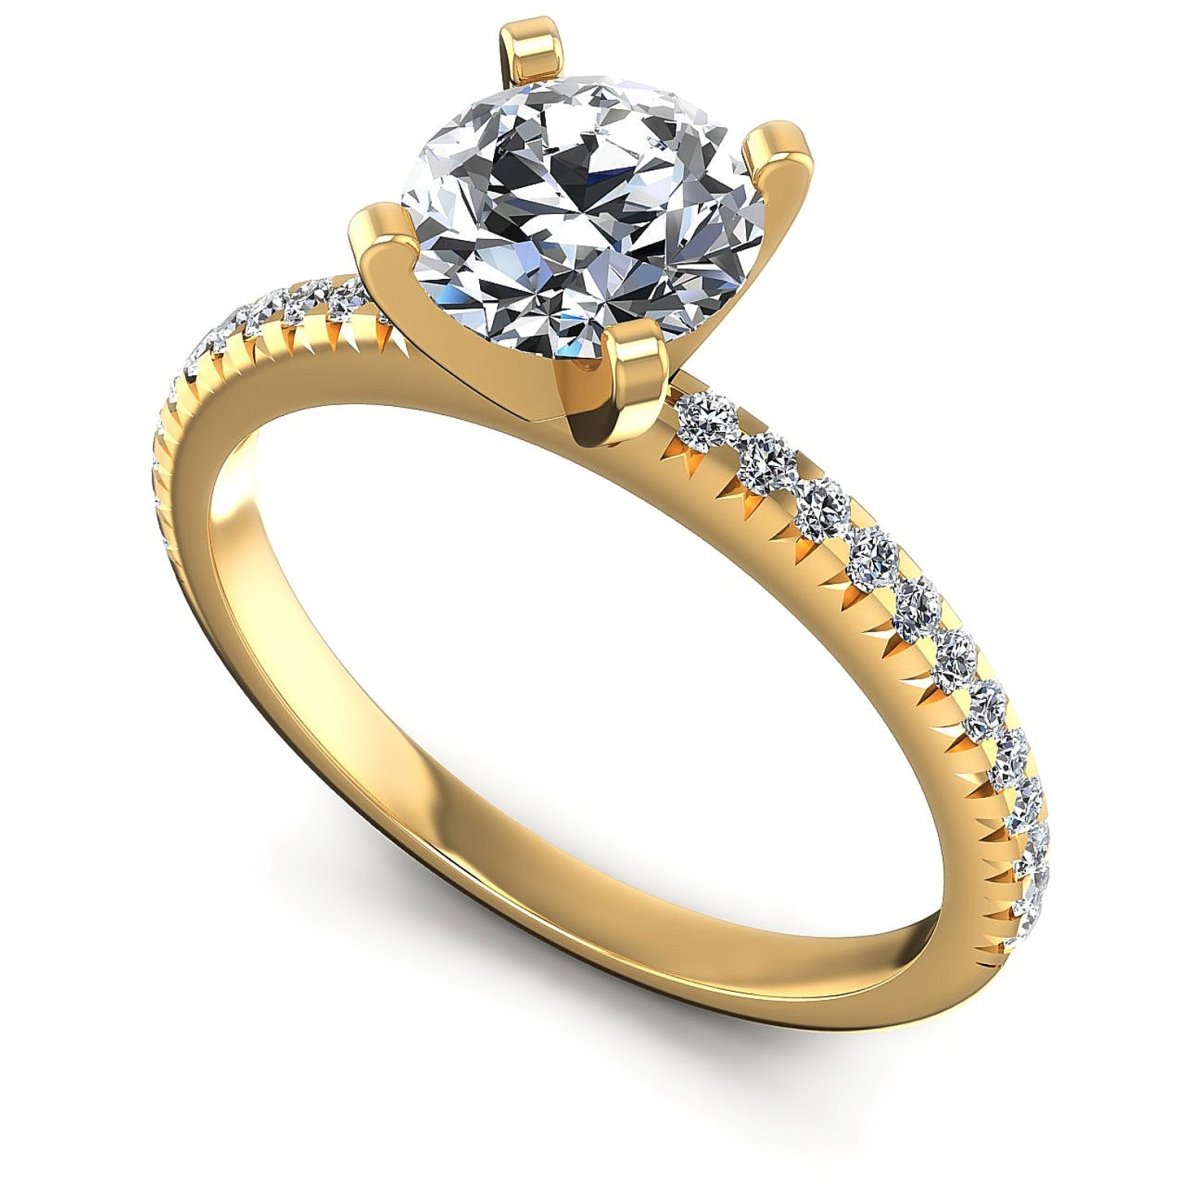 Special 1.00 CT Round Cut Diamond Engagement Ring in 14KT Yellow Gold - Primestyle.com